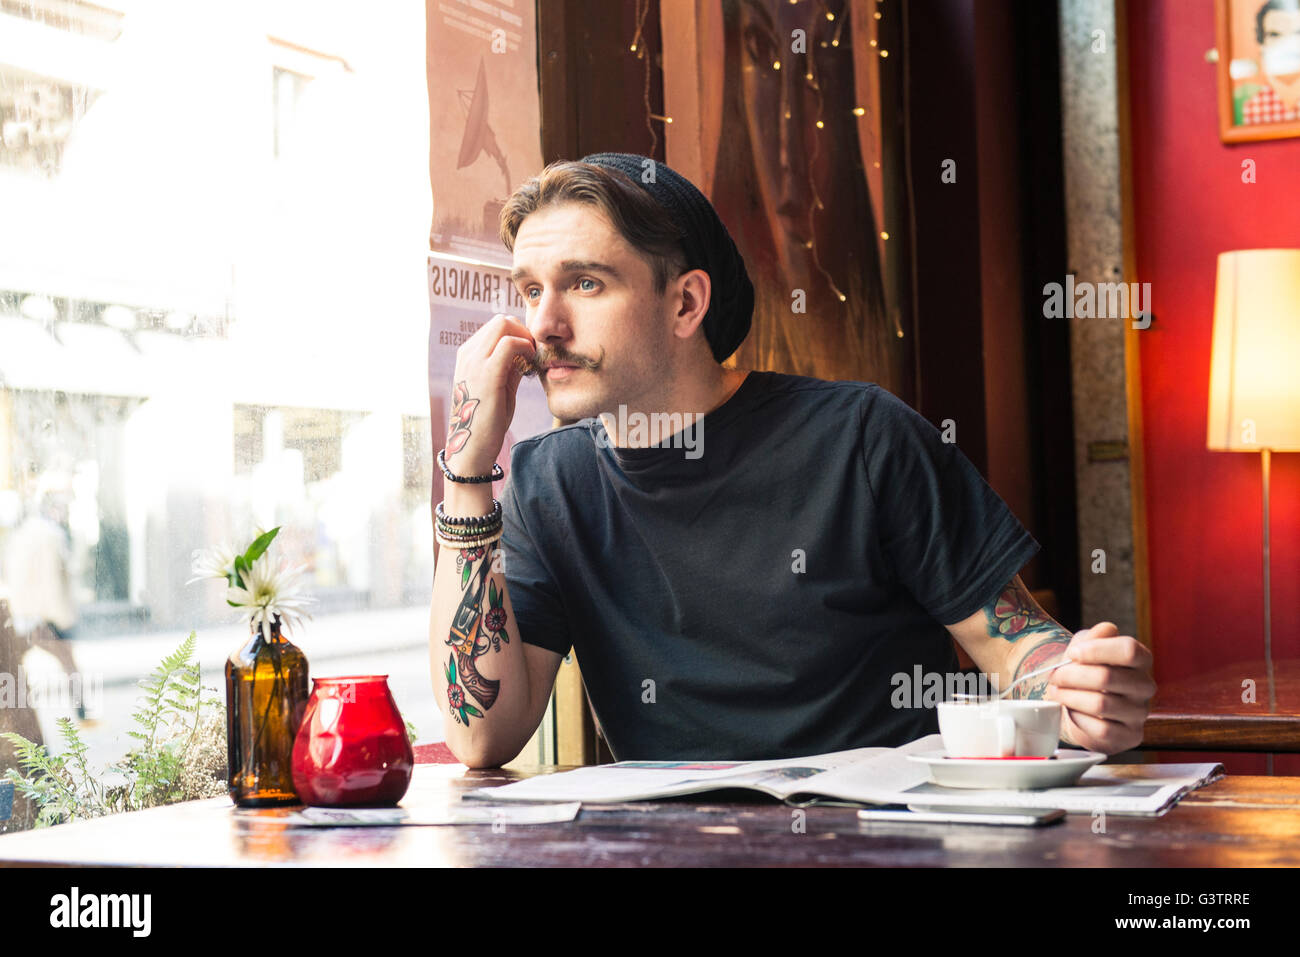 A young man sitting at a table in a coffee shop in Manchester. Stock Photo